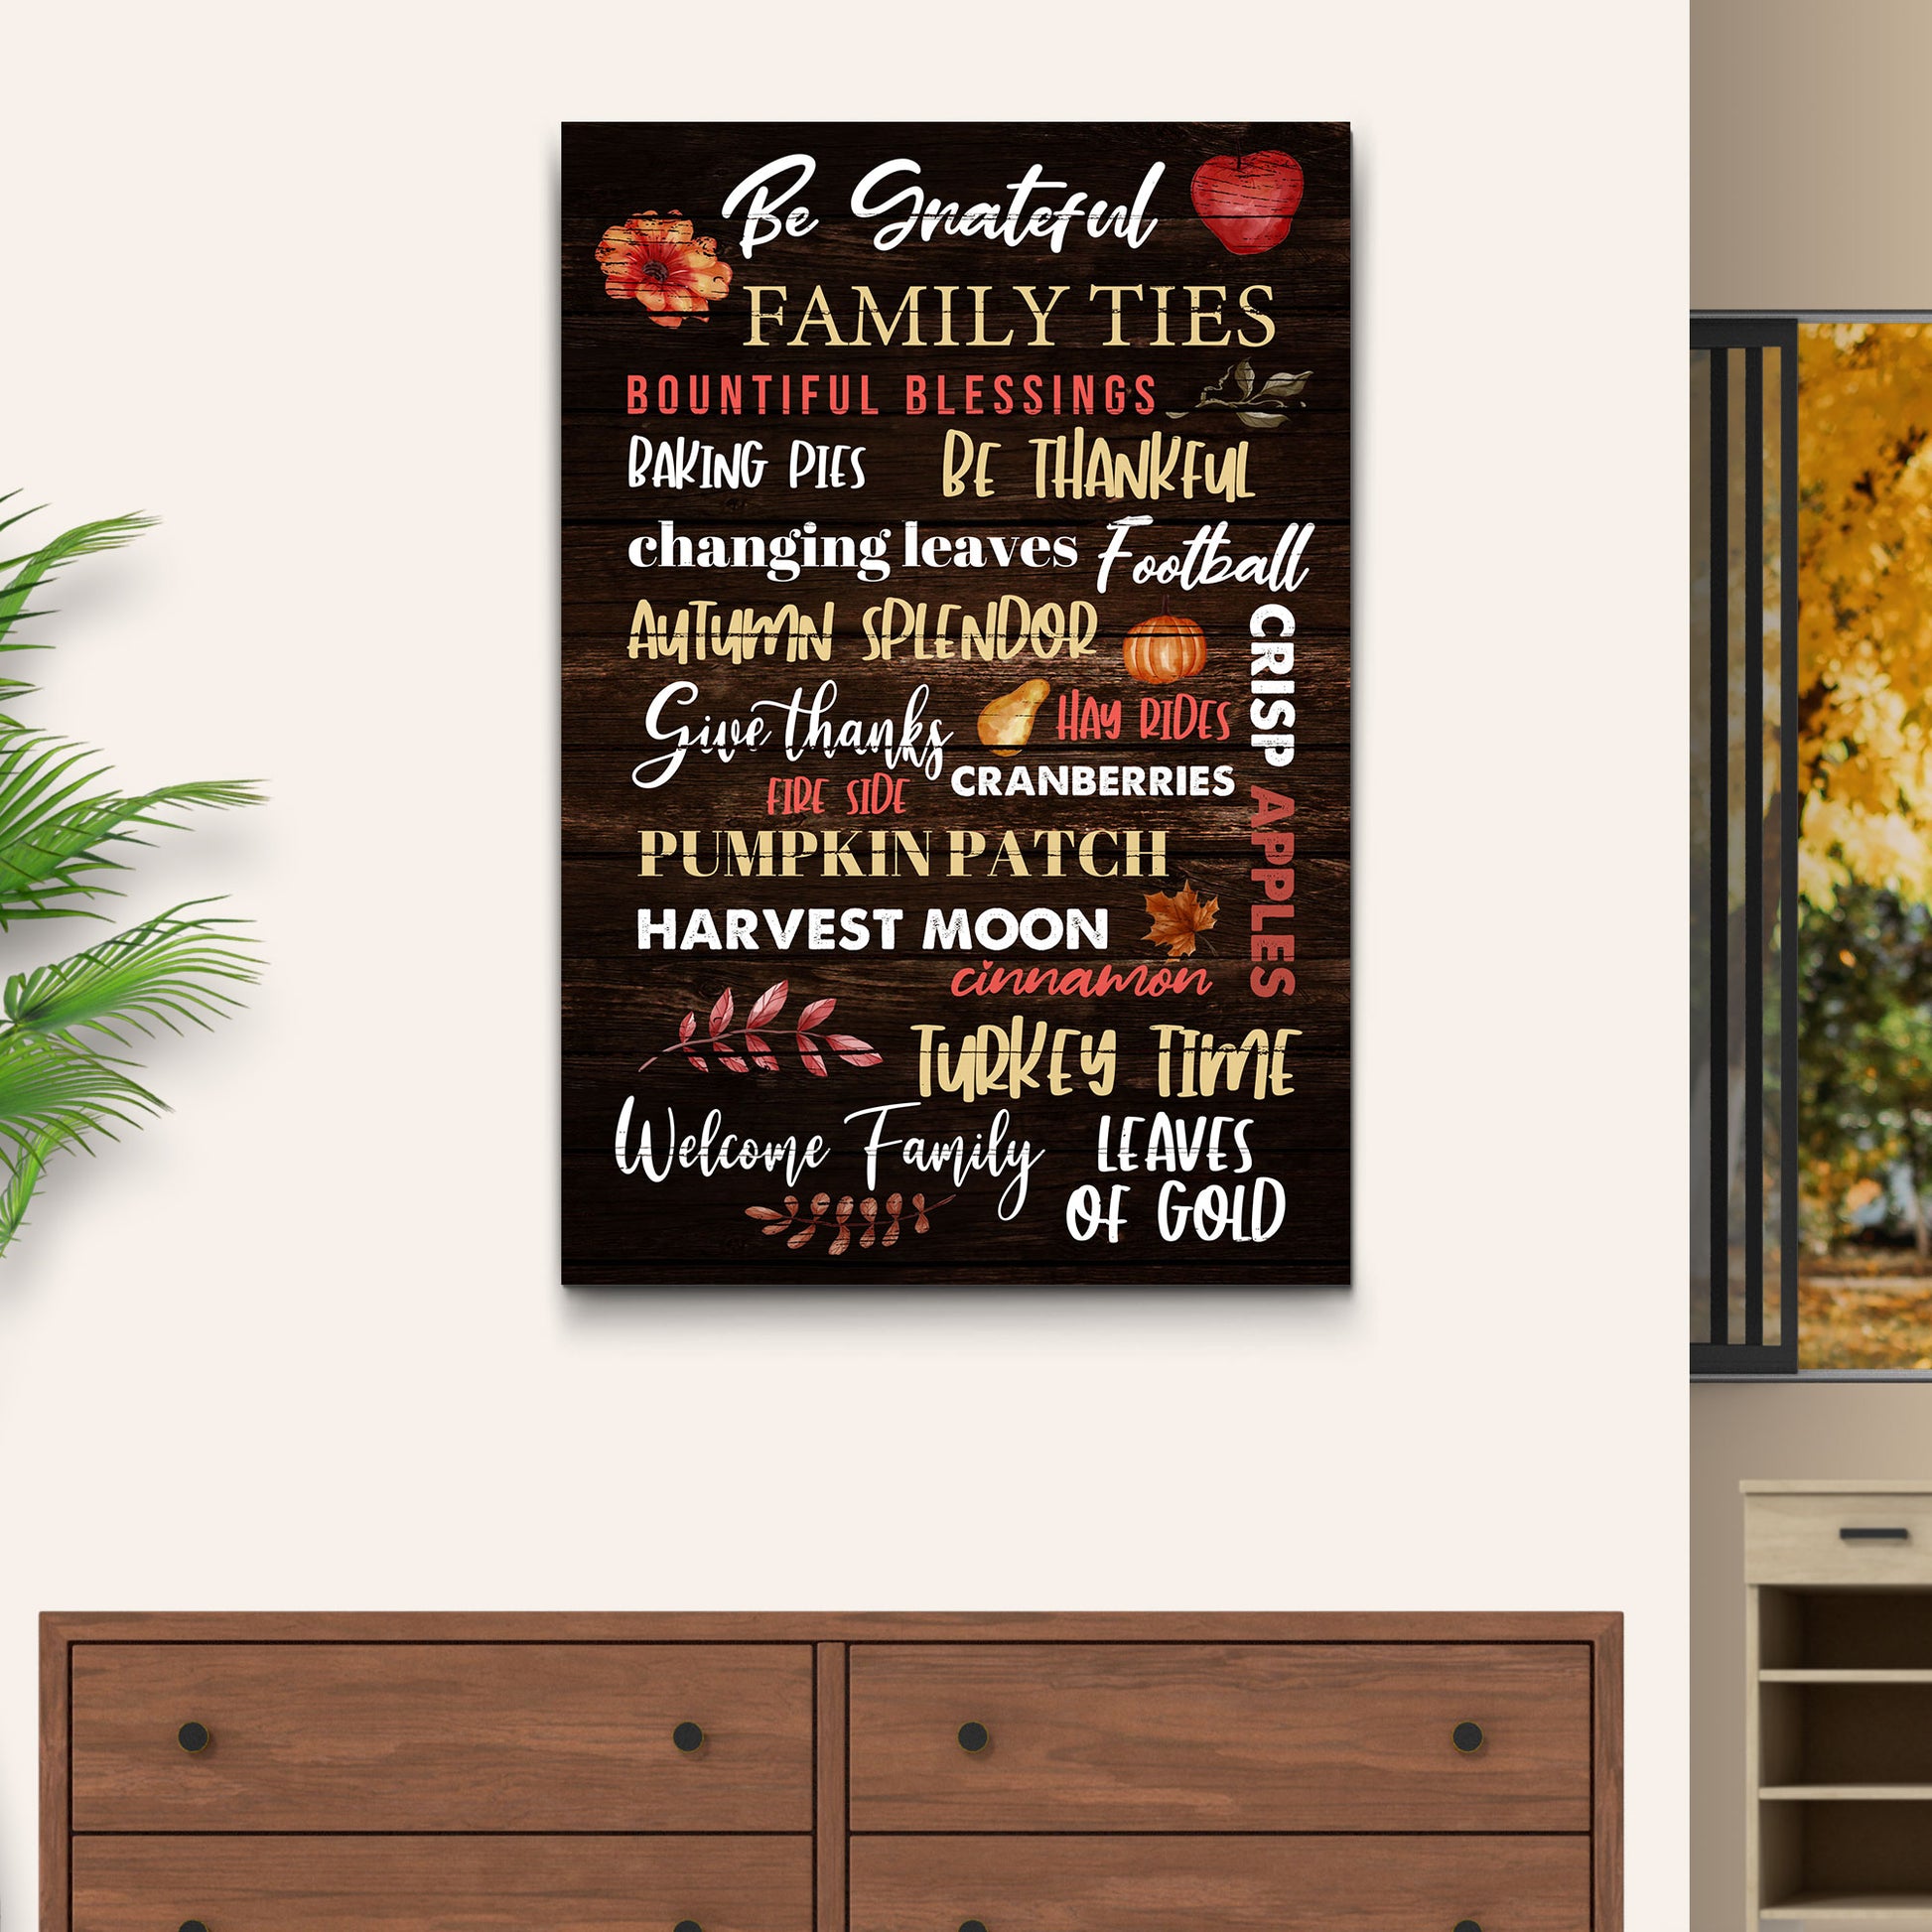 Be Grateful Bountiful Blessings Sign Style 2 - Image by Tailored Canvases